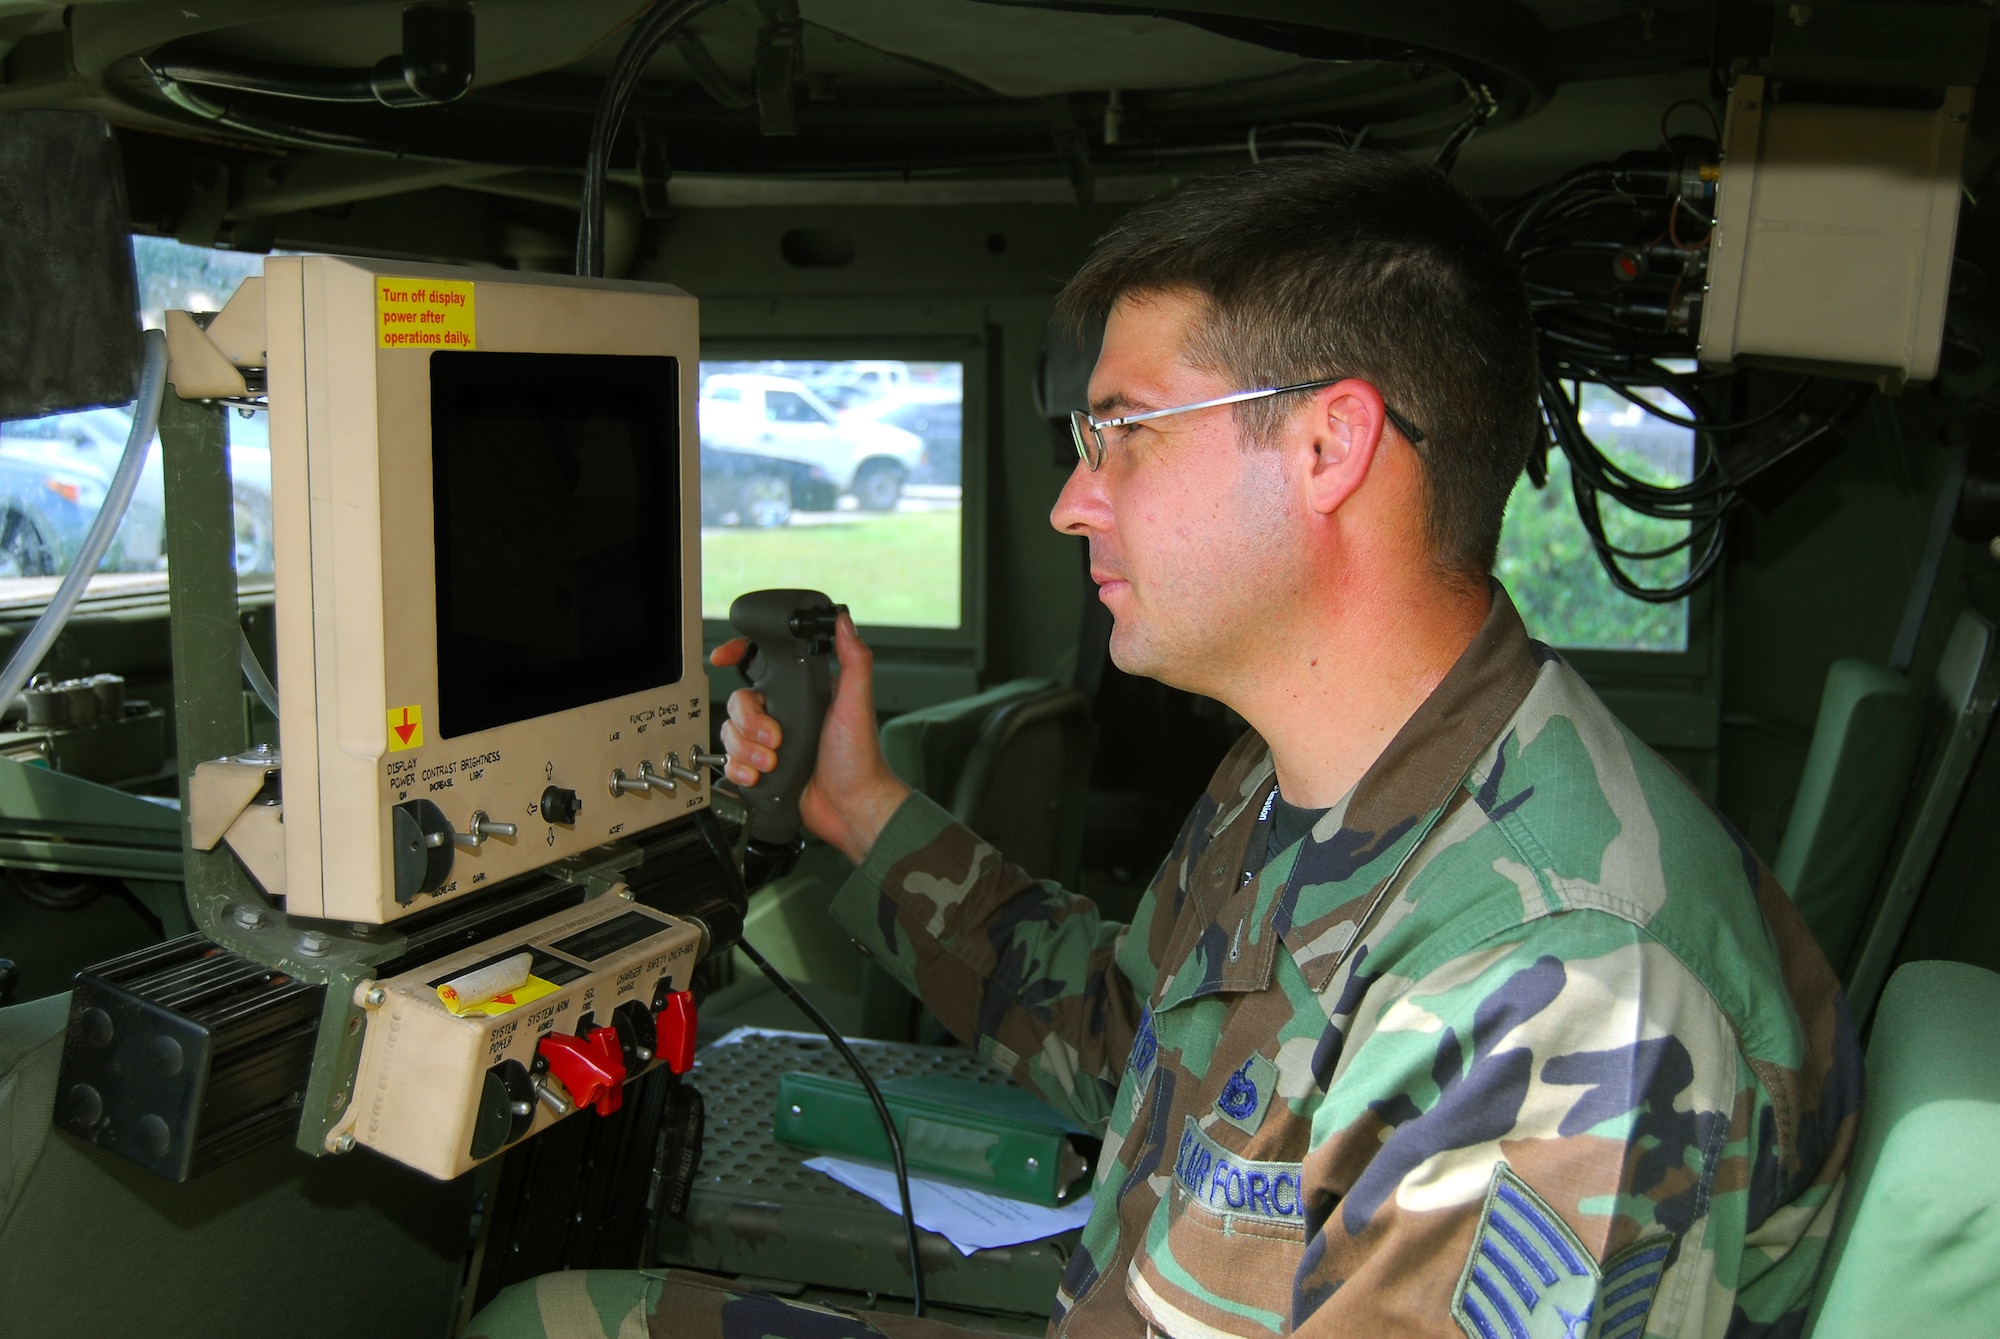 Tech. Sgt. Mark Klinefelter, 824th Security Forces Squadron, Alpha flight sergeant, operates a common remotely operated weapon station Sept. 12 at Moody Air Force Base. The CROWS turret allows a gunner to remain safely protected inside his armored vehicle while operating the computer-stabilized, laser-aimed weapon.  (U.S. Air Force photo by Tech. Sgt. Parker Gyokeres)